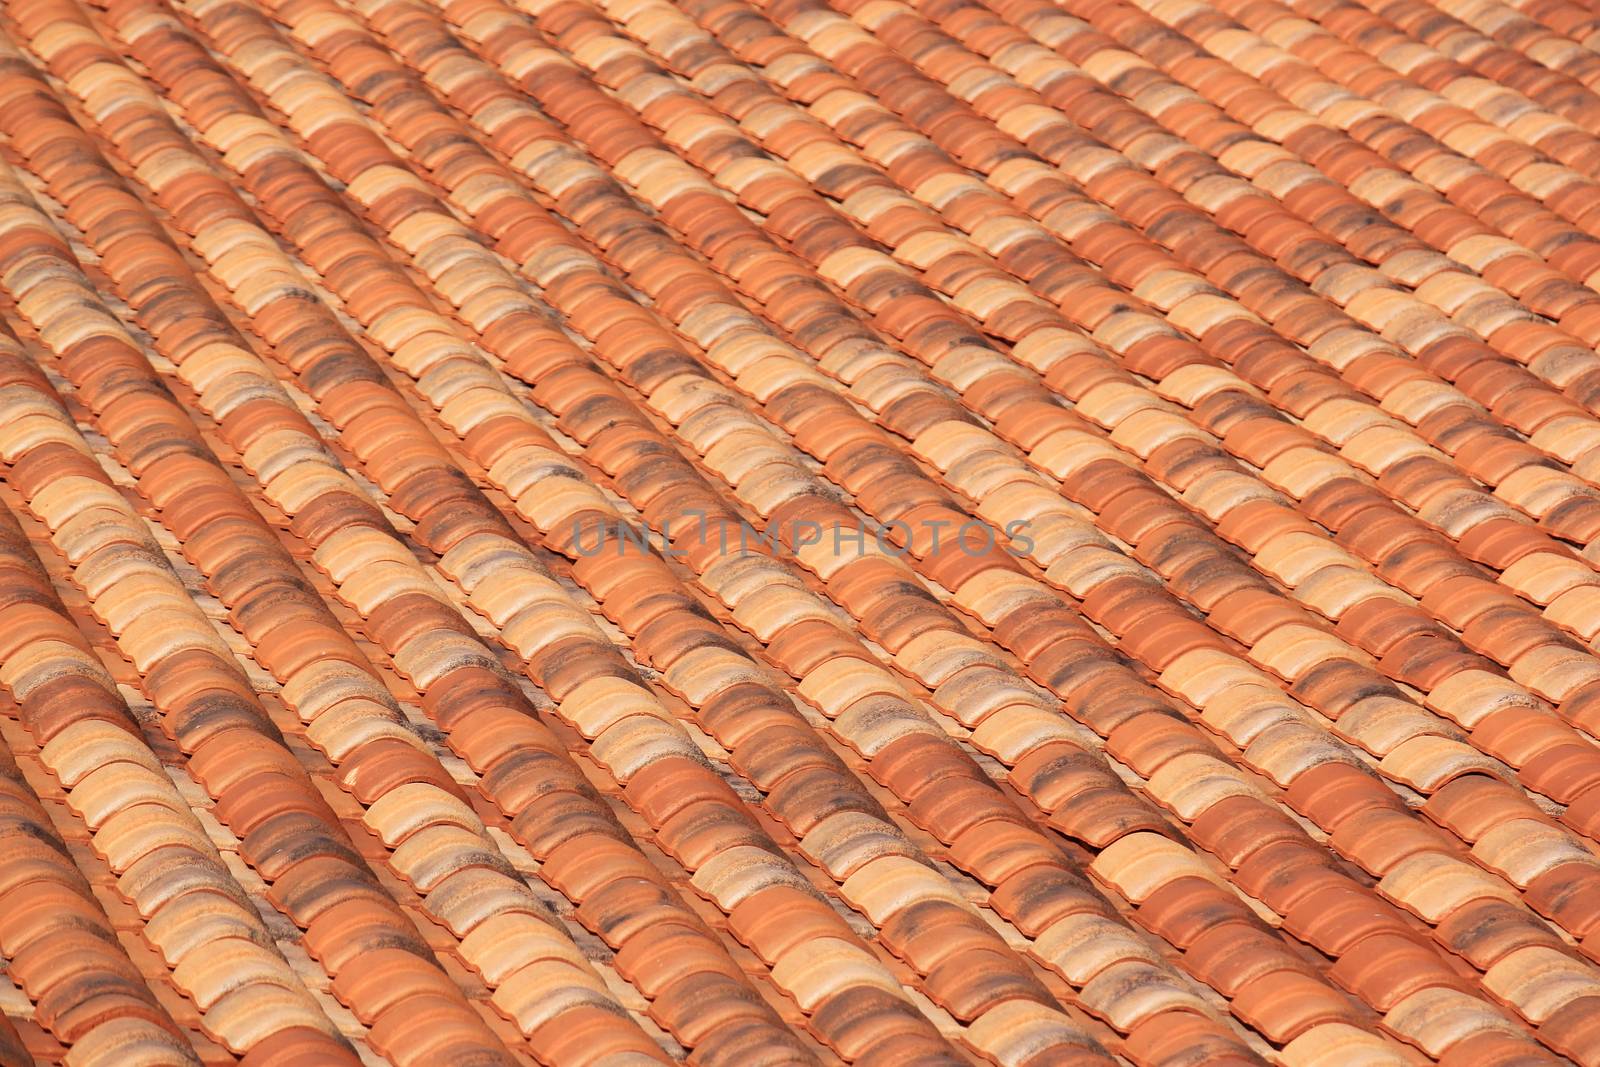 roof of a house covered with tiles Basque